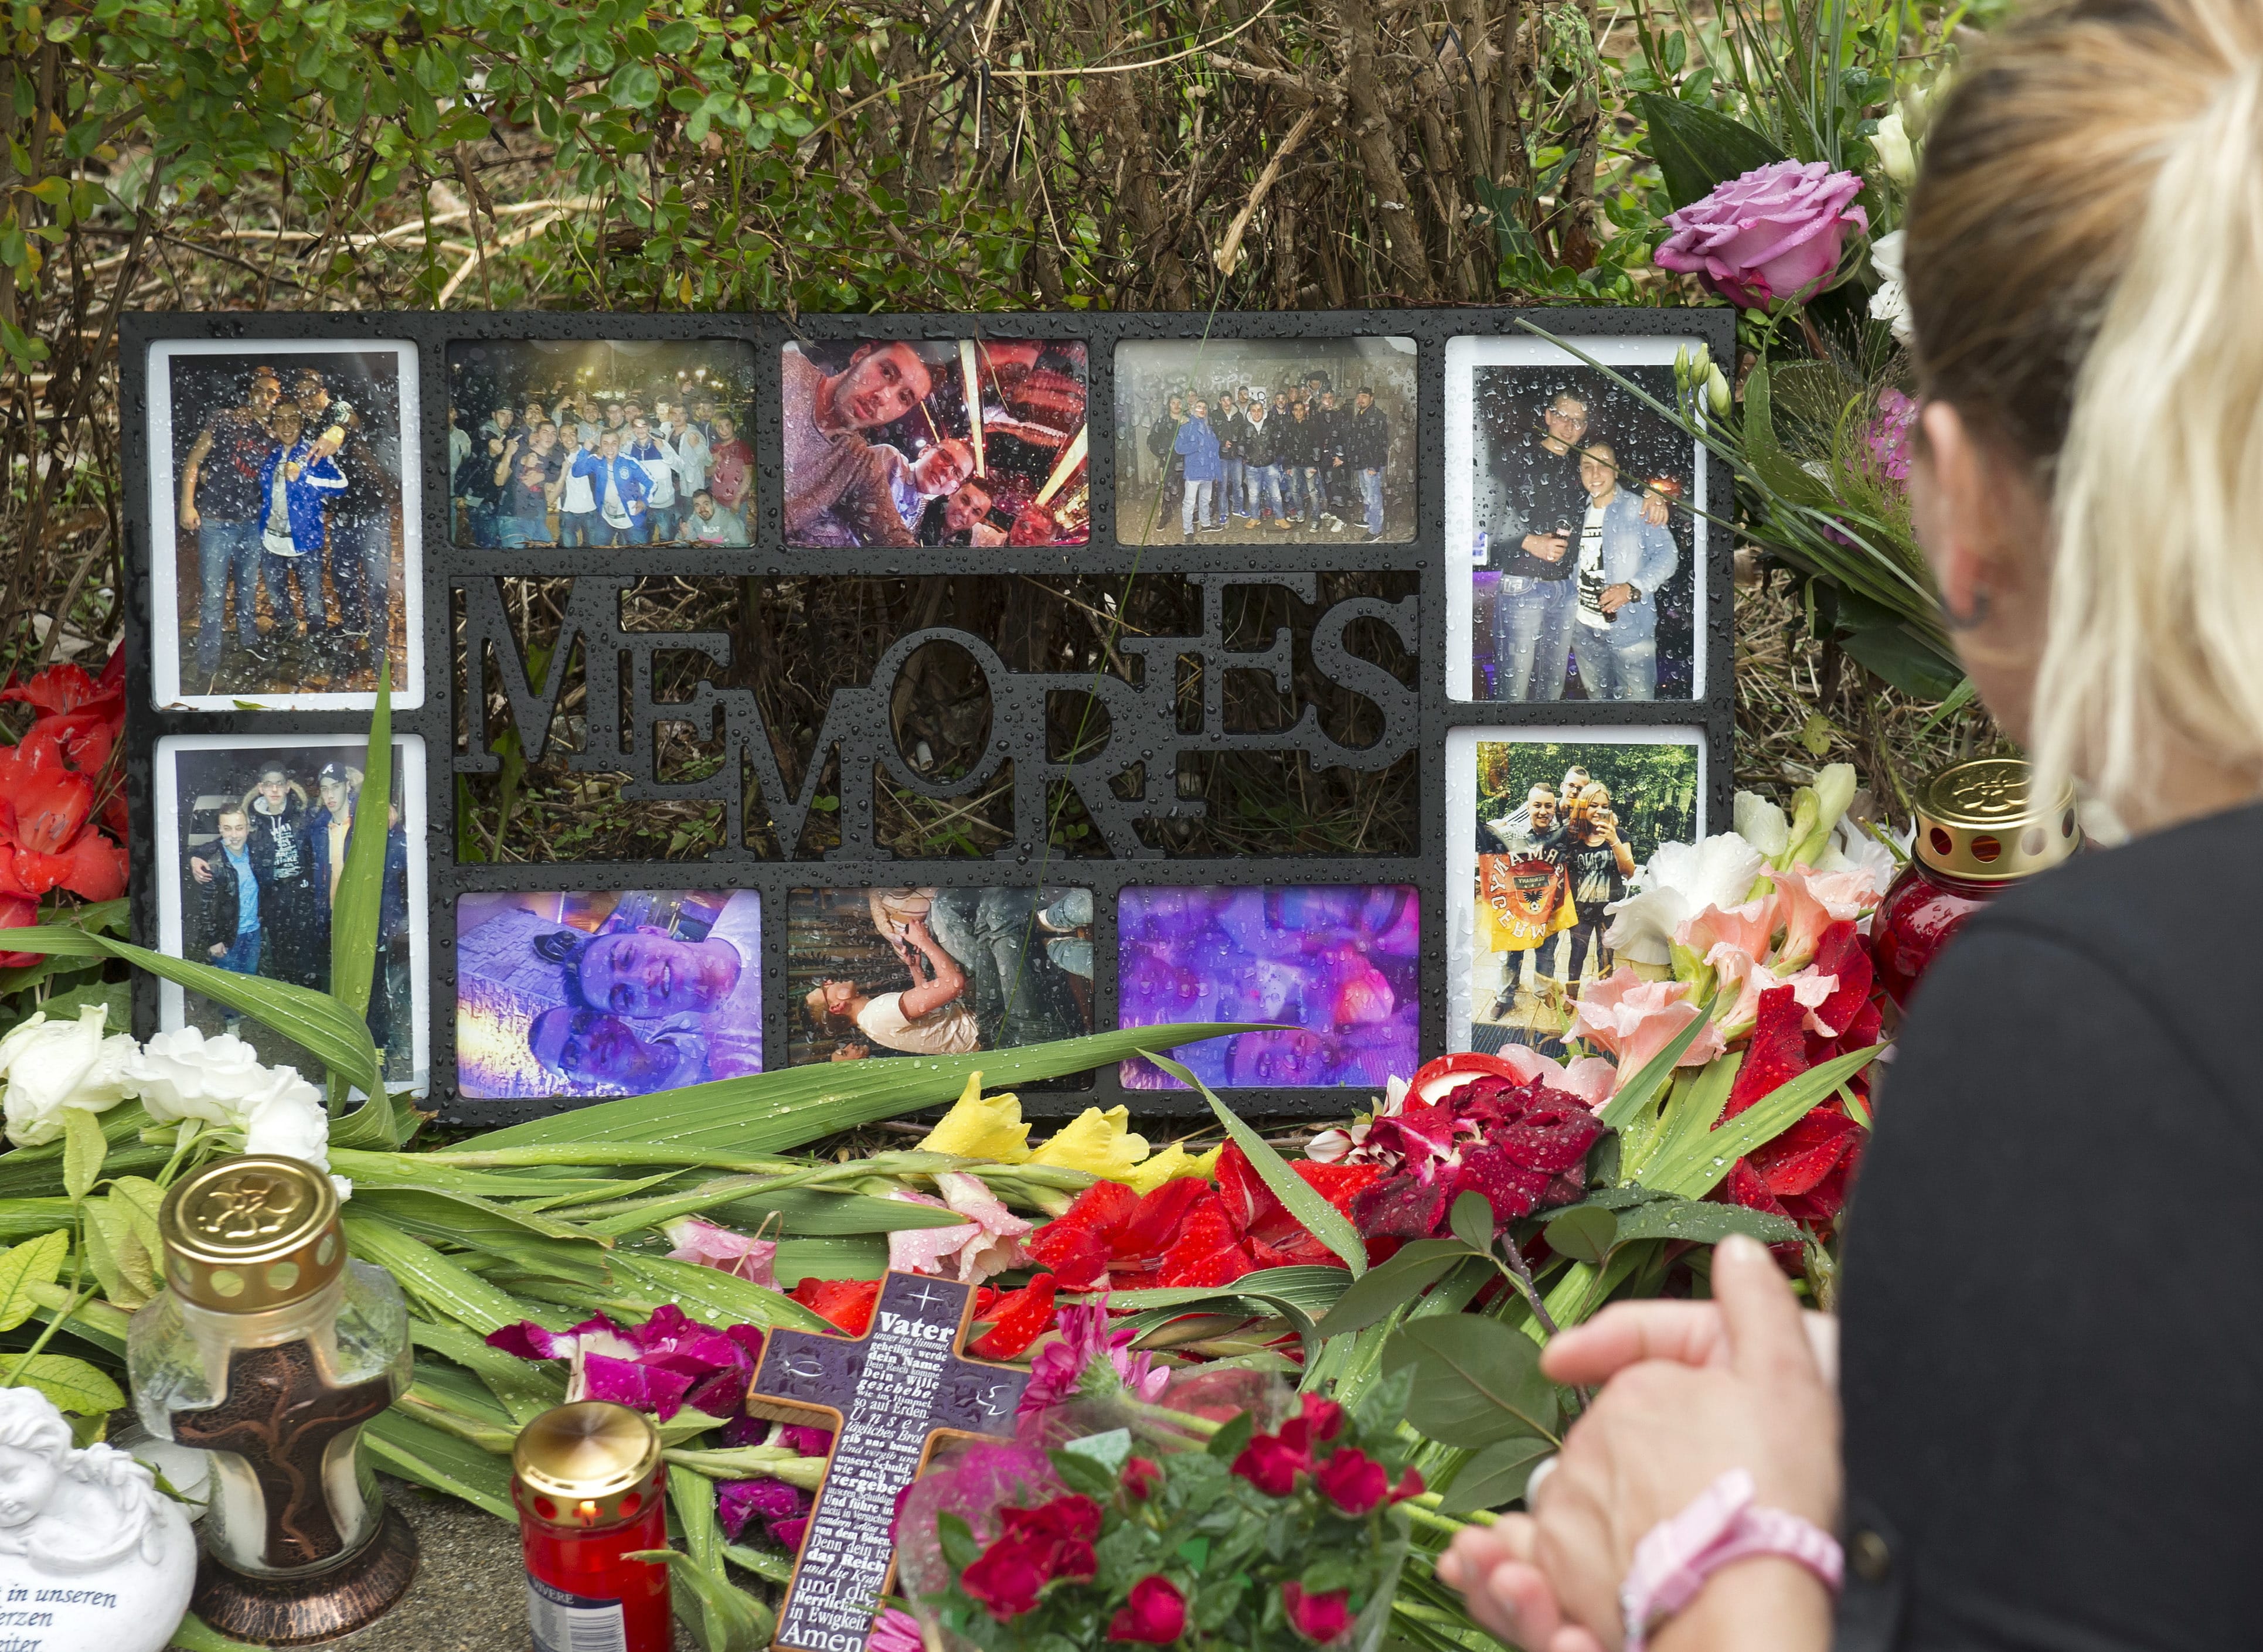 A woman mourns in front of flowers near the Olympia shopping center where a shooting took place leaving nine people dead the day before in Munich, Germany, Saturday, July 23, 2016. Police piecing together a profile of the gunman whose rampage at a Munich mall Friday left nine people dead described him Saturday as a lone, depression-plagued teenager.